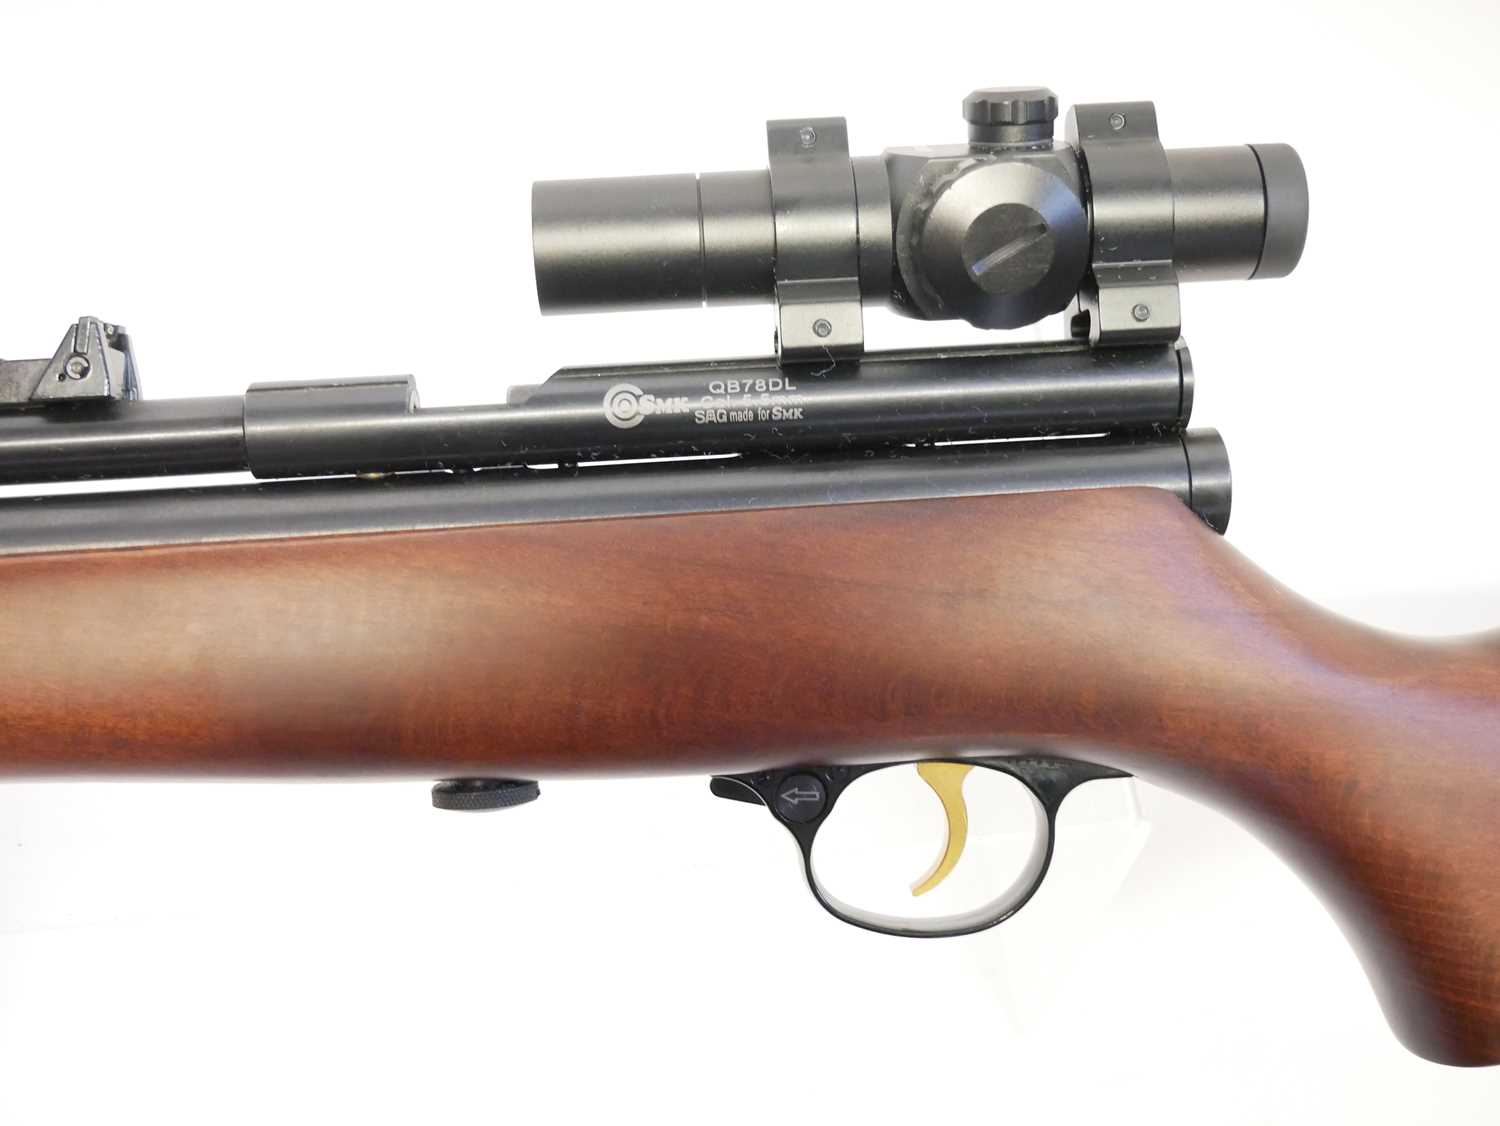 SMK QB78DL .22 CO2 air rifle, 29inch barrel including the fitted moderator, fitted with Hawke scope, - Image 9 of 12